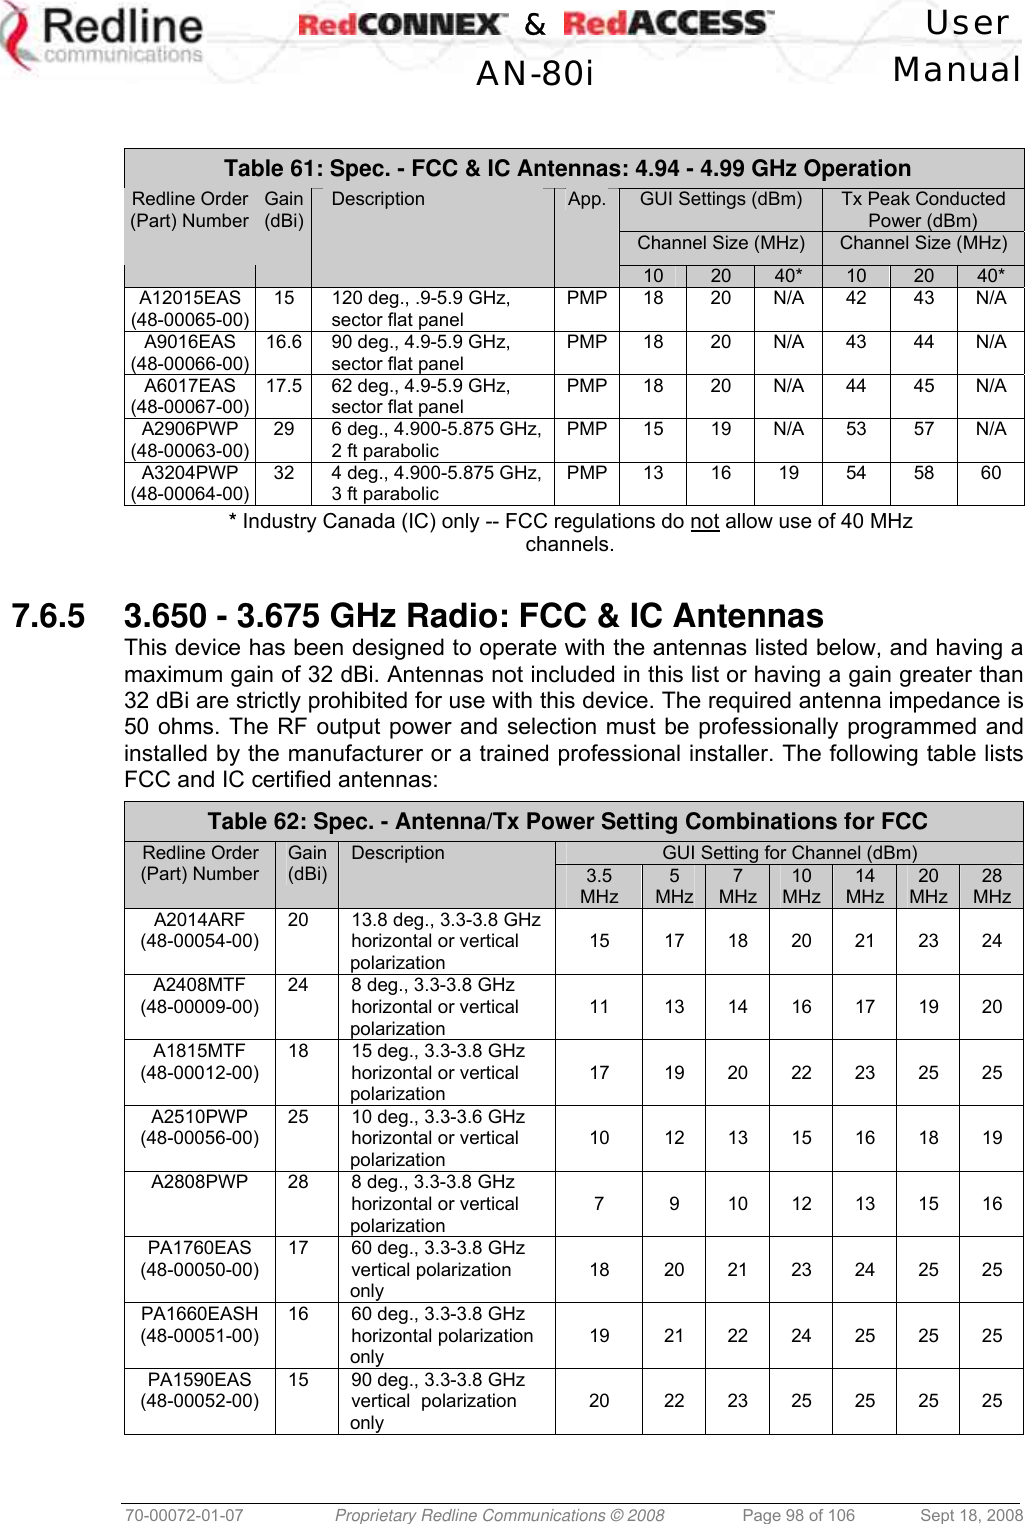    &amp;  User  AN-80i Manual  70-00072-01-07  Proprietary Redline Communications © 2008  Page 98 of 106  Sept 18, 2008   Table 61: Spec. - FCC &amp; IC Antennas: 4.94 - 4.99 GHz Operation GUI Settings (dBm)  Tx Peak Conducted Power (dBm) Channel Size (MHz)  Channel Size (MHz) Redline Order (Part) Number Gain (dBi) Description  App. 10  20  40*  10  20  40* A12015EAS  (48-00065-00) 15  120 deg., .9-5.9 GHz, sector flat panel PMP 18 20 N/A 42 43 N/A A9016EAS (48-00066-00) 16.6  90 deg., 4.9-5.9 GHz, sector flat panel PMP 18 20 N/A 43 44 N/A A6017EAS (48-00067-00) 17.5  62 deg., 4.9-5.9 GHz, sector flat panel PMP 18 20 N/A 44 45 N/A A2906PWP (48-00063-00) 29  6 deg., 4.900-5.875 GHz, 2 ft parabolic PMP 15 19 N/A 53 57 N/A A3204PWP (48-00064-00) 32  4 deg., 4.900-5.875 GHz, 3 ft parabolic PMP  13 16 19 54 58 60 * Industry Canada (IC) only -- FCC regulations do not allow use of 40 MHz channels.  7.6.5 3.650 - 3.675 GHz Radio: FCC &amp; IC Antennas This device has been designed to operate with the antennas listed below, and having a maximum gain of 32 dBi. Antennas not included in this list or having a gain greater than 32 dBi are strictly prohibited for use with this device. The required antenna impedance is 50 ohms. The RF output power and selection must be professionally programmed and installed by the manufacturer or a trained professional installer. The following table lists FCC and IC certified antennas: Table 62: Spec. - Antenna/Tx Power Setting Combinations for FCC GUI Setting for Channel (dBm) Redline Order (Part) Number Gain (dBi) Description 3.5 MHz 5 MHz 7 MHz 10 MHz 14 MHz 20 MHz 28 MHz A2014ARF (48-00054-00) 20  13.8 deg., 3.3-3.8 GHz horizontal or vertical polarization 15  17 18 20 21 23 24 A2408MTF (48-00009-00) 24  8 deg., 3.3-3.8 GHz  horizontal or vertical polarization 11  13 14 16 17 19 20 A1815MTF (48-00012-00) 18  15 deg., 3.3-3.8 GHz  horizontal or vertical polarization 17  19 20 22 23 25 25 A2510PWP (48-00056-00) 25  10 deg., 3.3-3.6 GHz  horizontal or vertical polarization 10  12 13 15 16 18 19 A2808PWP  28  8 deg., 3.3-3.8 GHz  horizontal or vertical polarization 7  9  10 12 13 15 16 PA1760EAS (48-00050-00) 17  60 deg., 3.3-3.8 GHz vertical polarization only 18  20 21 23 24 25 25 PA1660EASH (48-00051-00) 16  60 deg., 3.3-3.8 GHz horizontal polarization only 19  21 22 24 25 25 25 PA1590EAS (48-00052-00) 15  90 deg., 3.3-3.8 GHz vertical  polarization only 20  22 23 25 25 25 25 